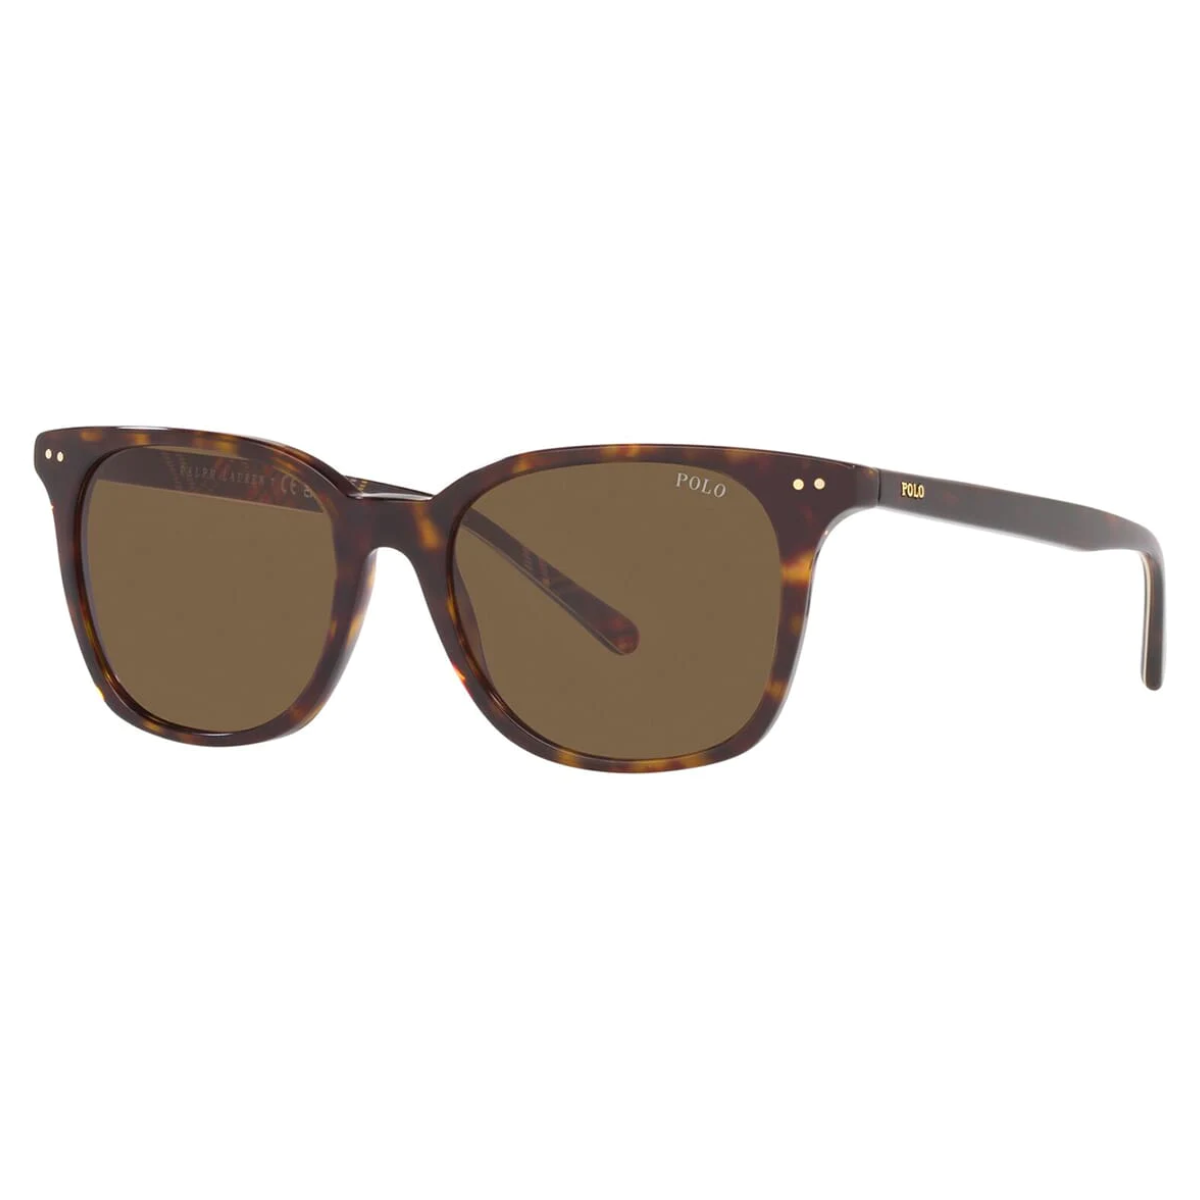 'Stylish Ralph Lauren Polo PH4187 Square Sunglasses for Men - Elevate your look with top brand quality and durable acetate frames. Shop now at Optorium!"